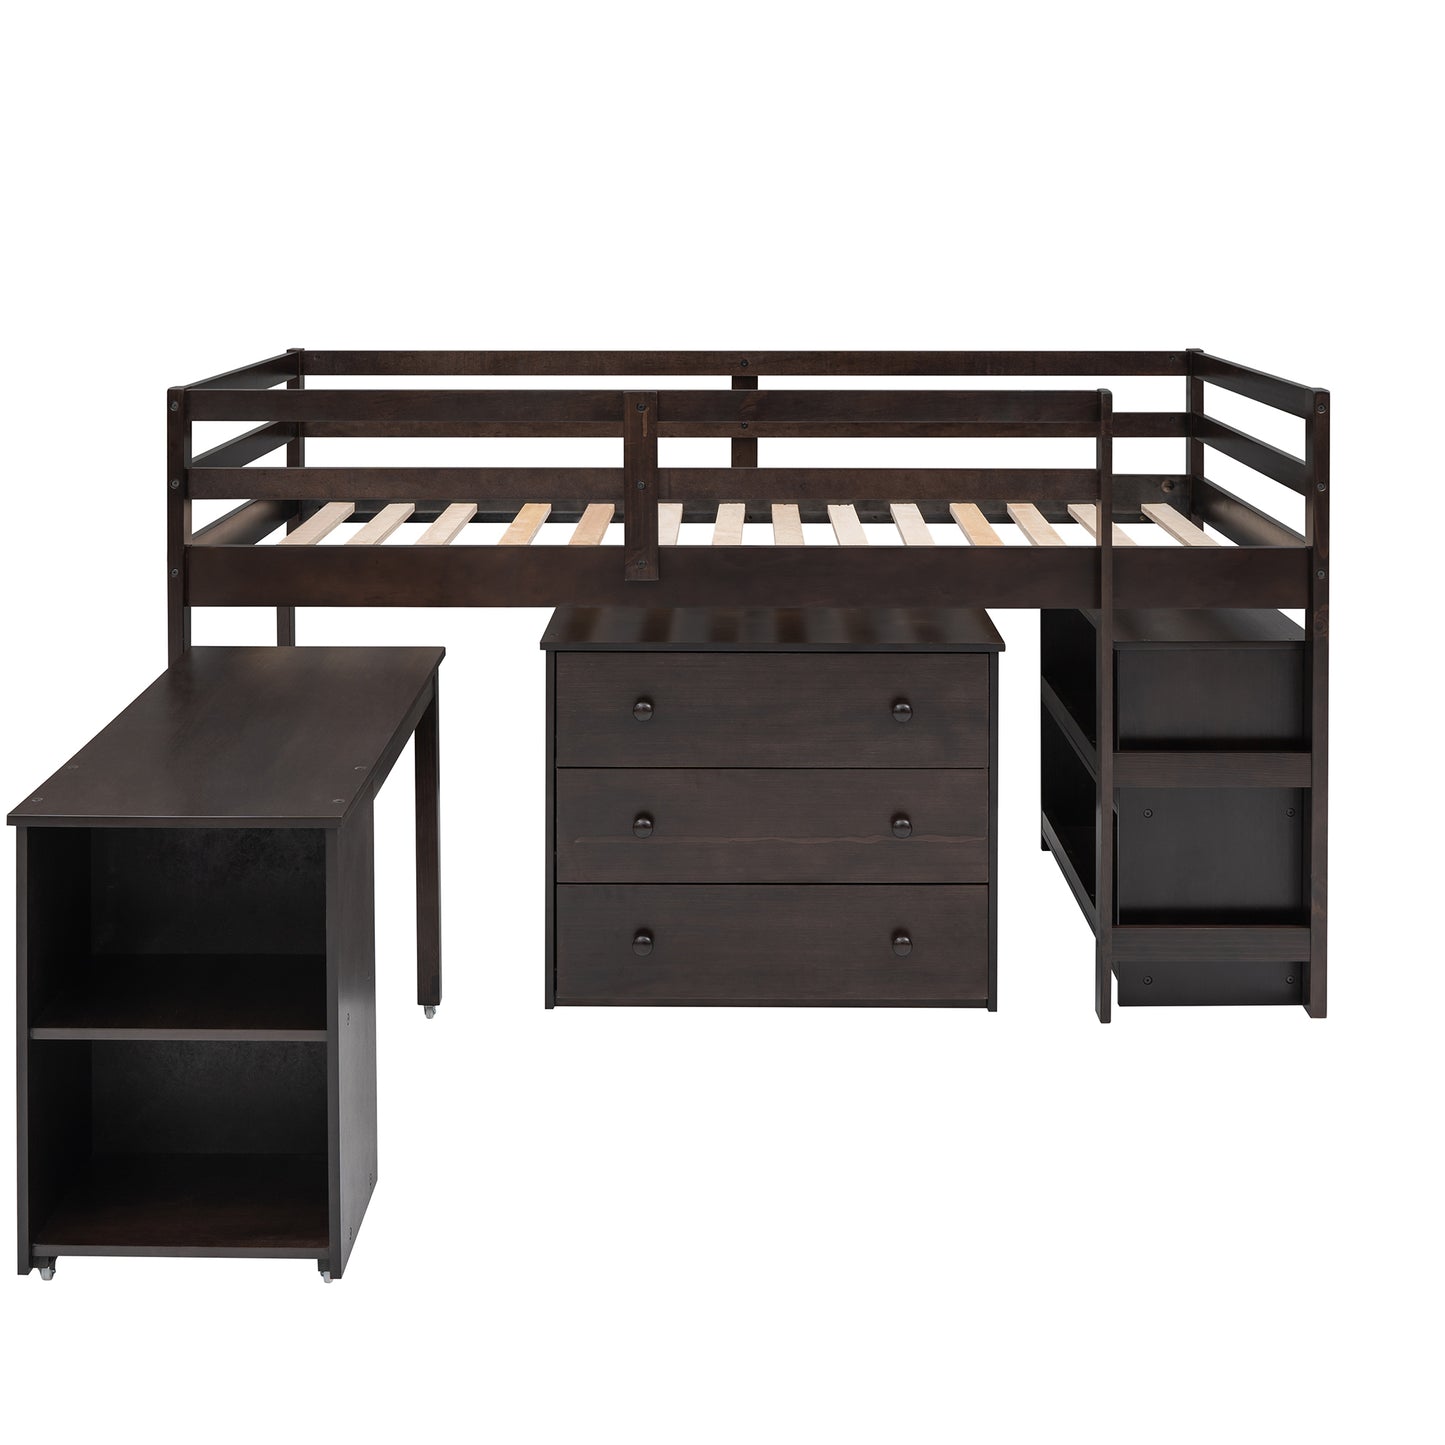 Low Study Twin Loft Bed with Cabinet and Rolling Portable Desk - Espresso